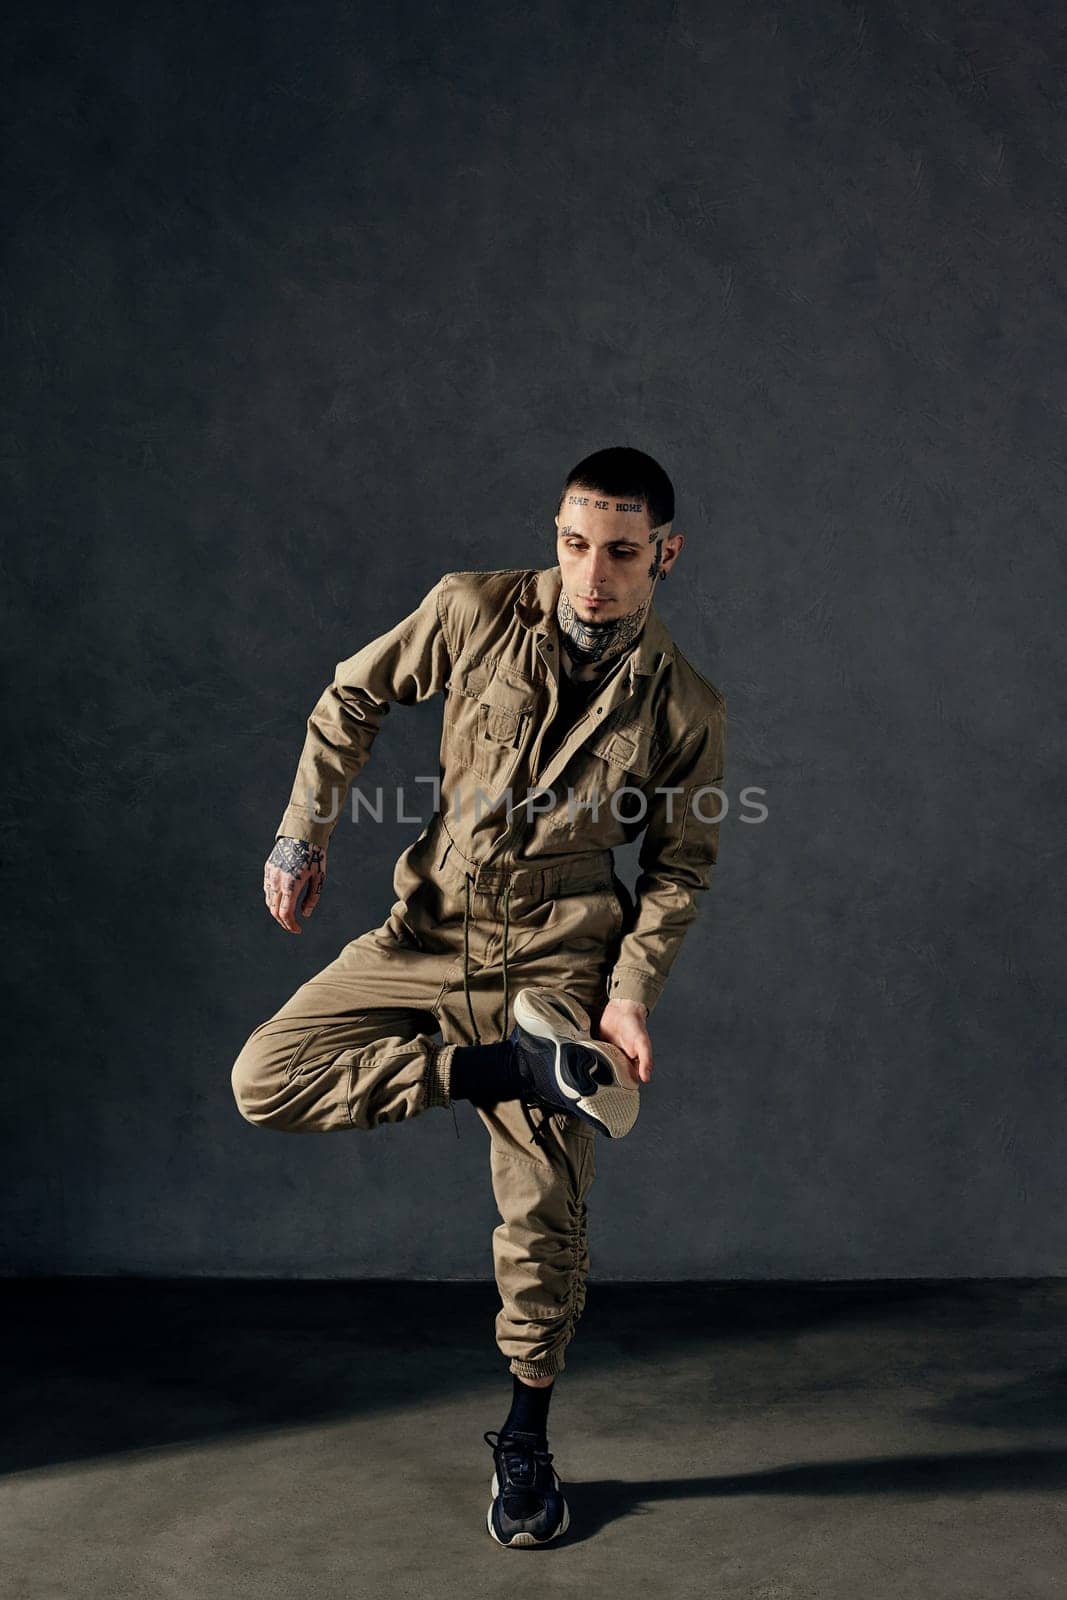 Handsome man with tattooed body and face, earrings, beard. Dressed in khaki overalls, black sneakers. Dancing on gray background. Dancehall, hip-hop by nazarovsergey